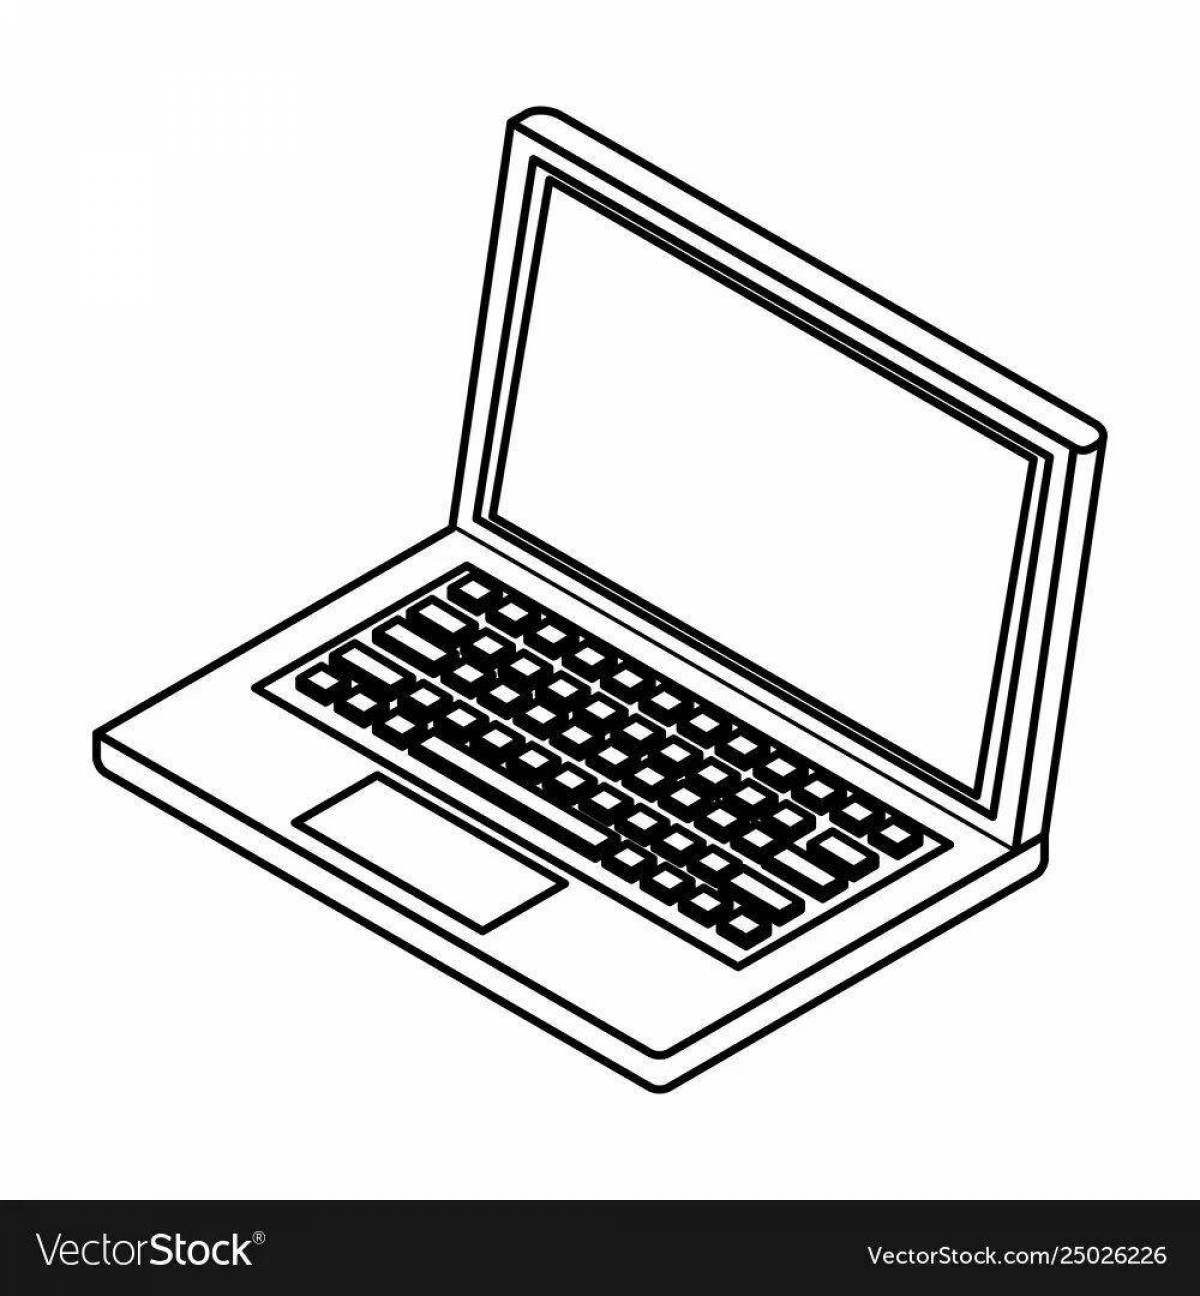 Playful macbook coloring page